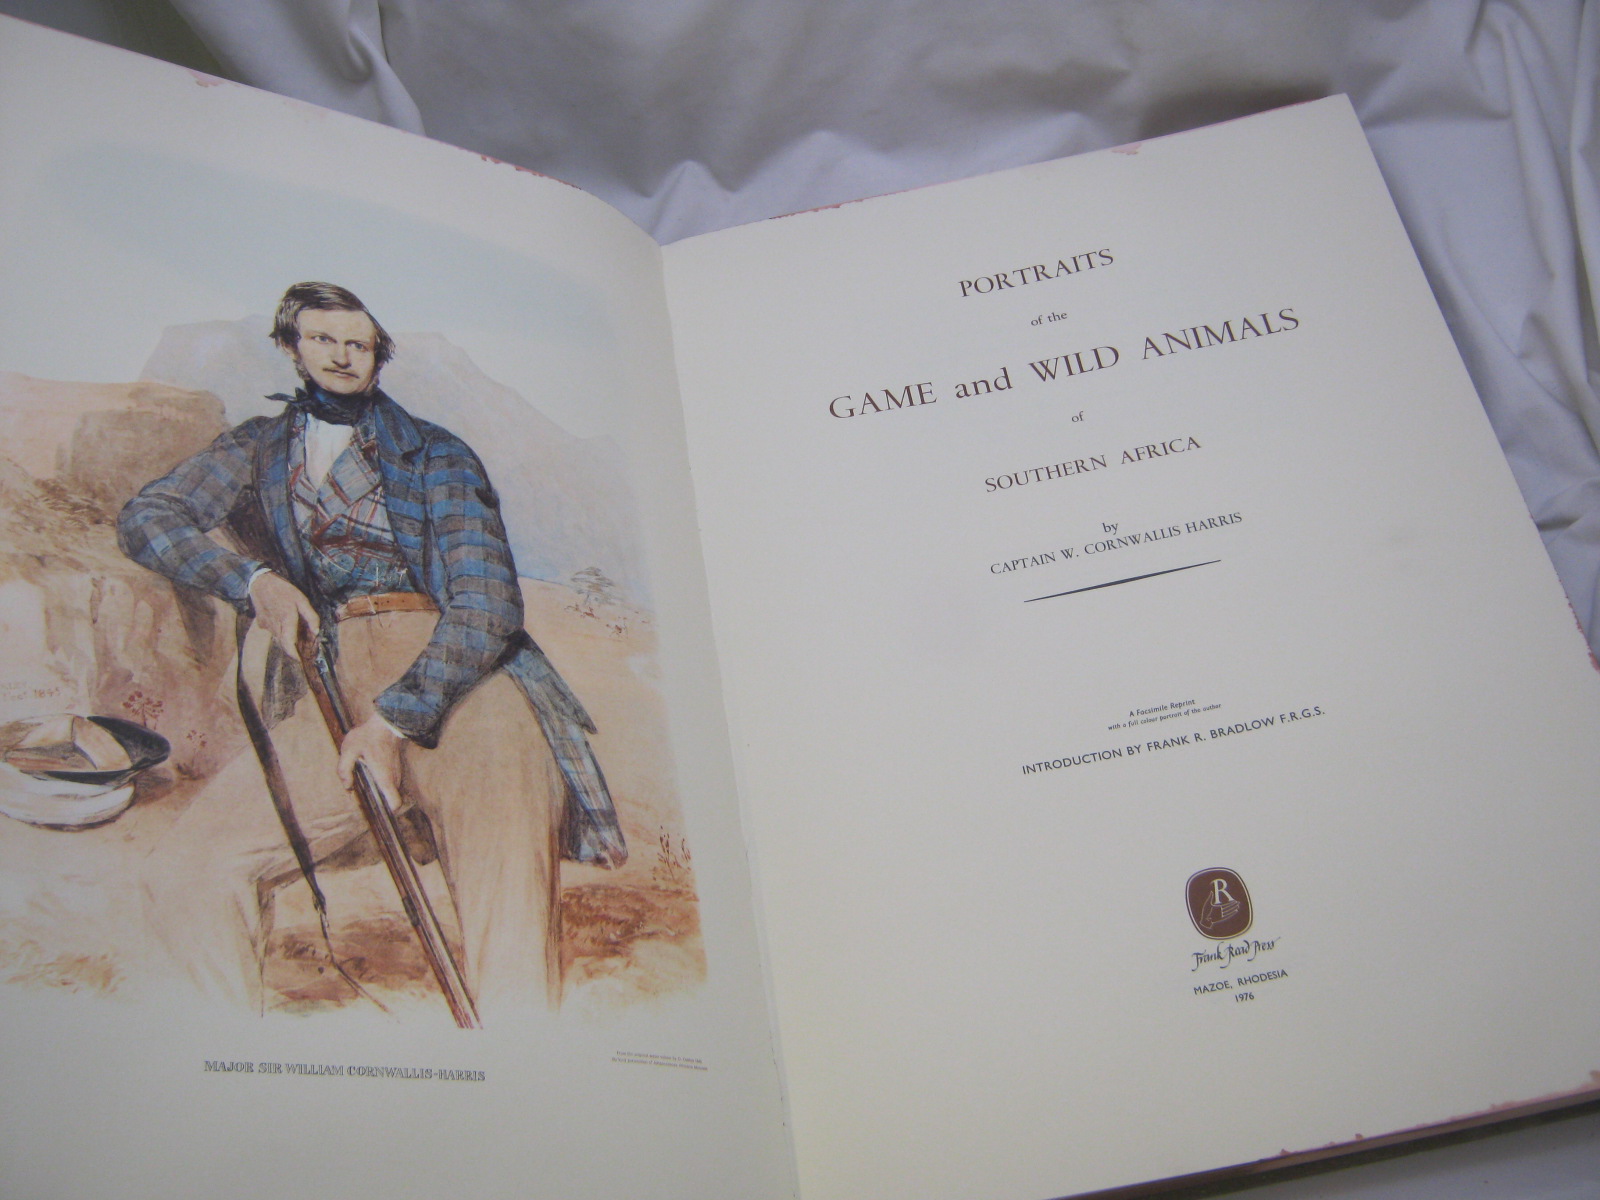 CAPTAIN W CORNWALLIS HARRIS: PORTRAITS OF THE GAME AND WILD ANIMALS OF SOUTHERN AFRICA, Mazoe